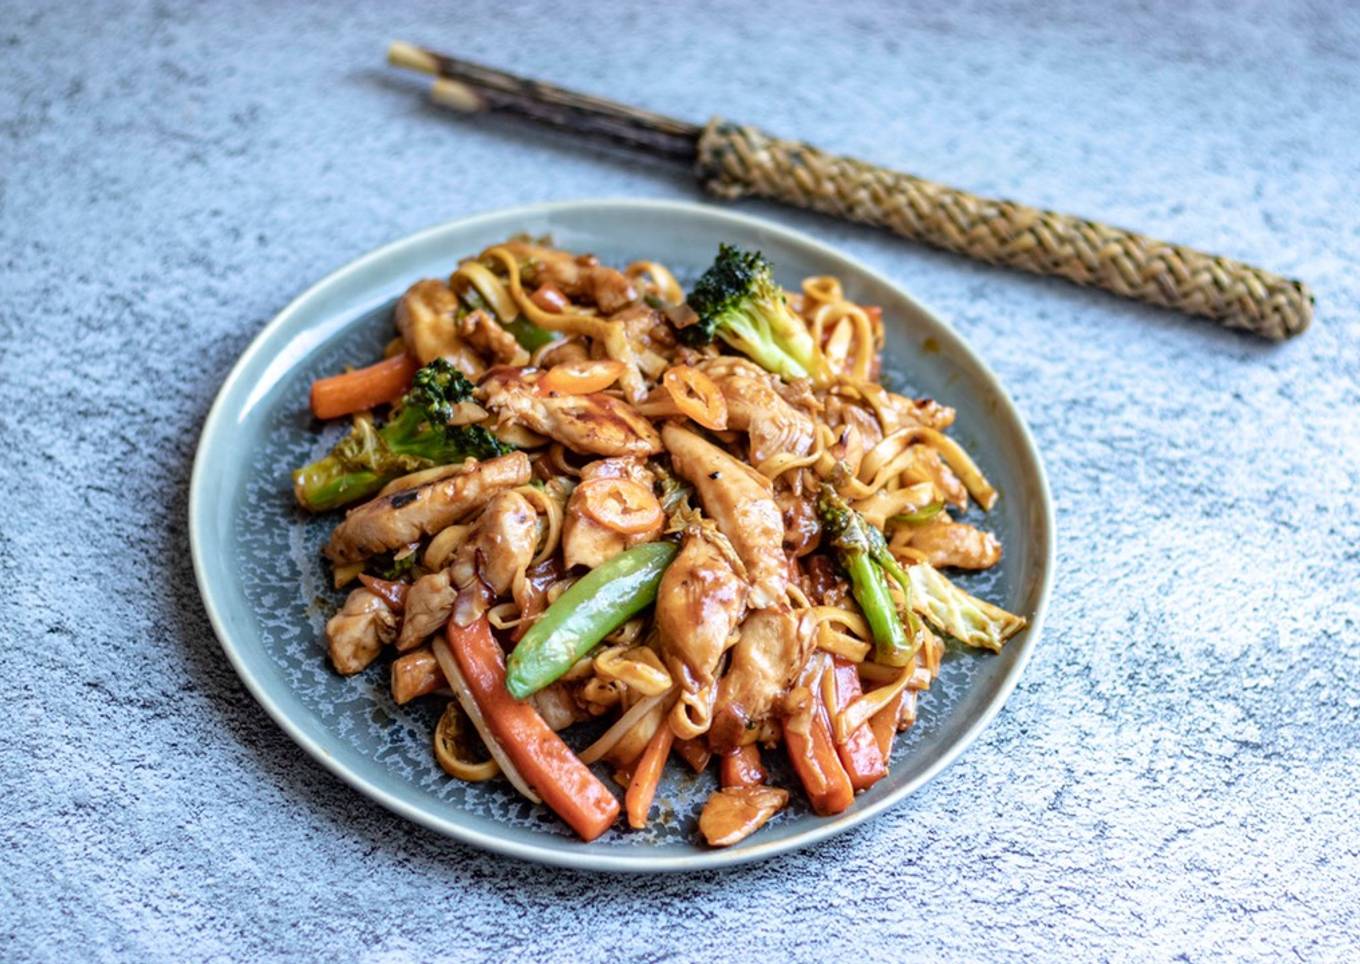 Easy homemade stir fry sweet chilli chicken with egg noodles